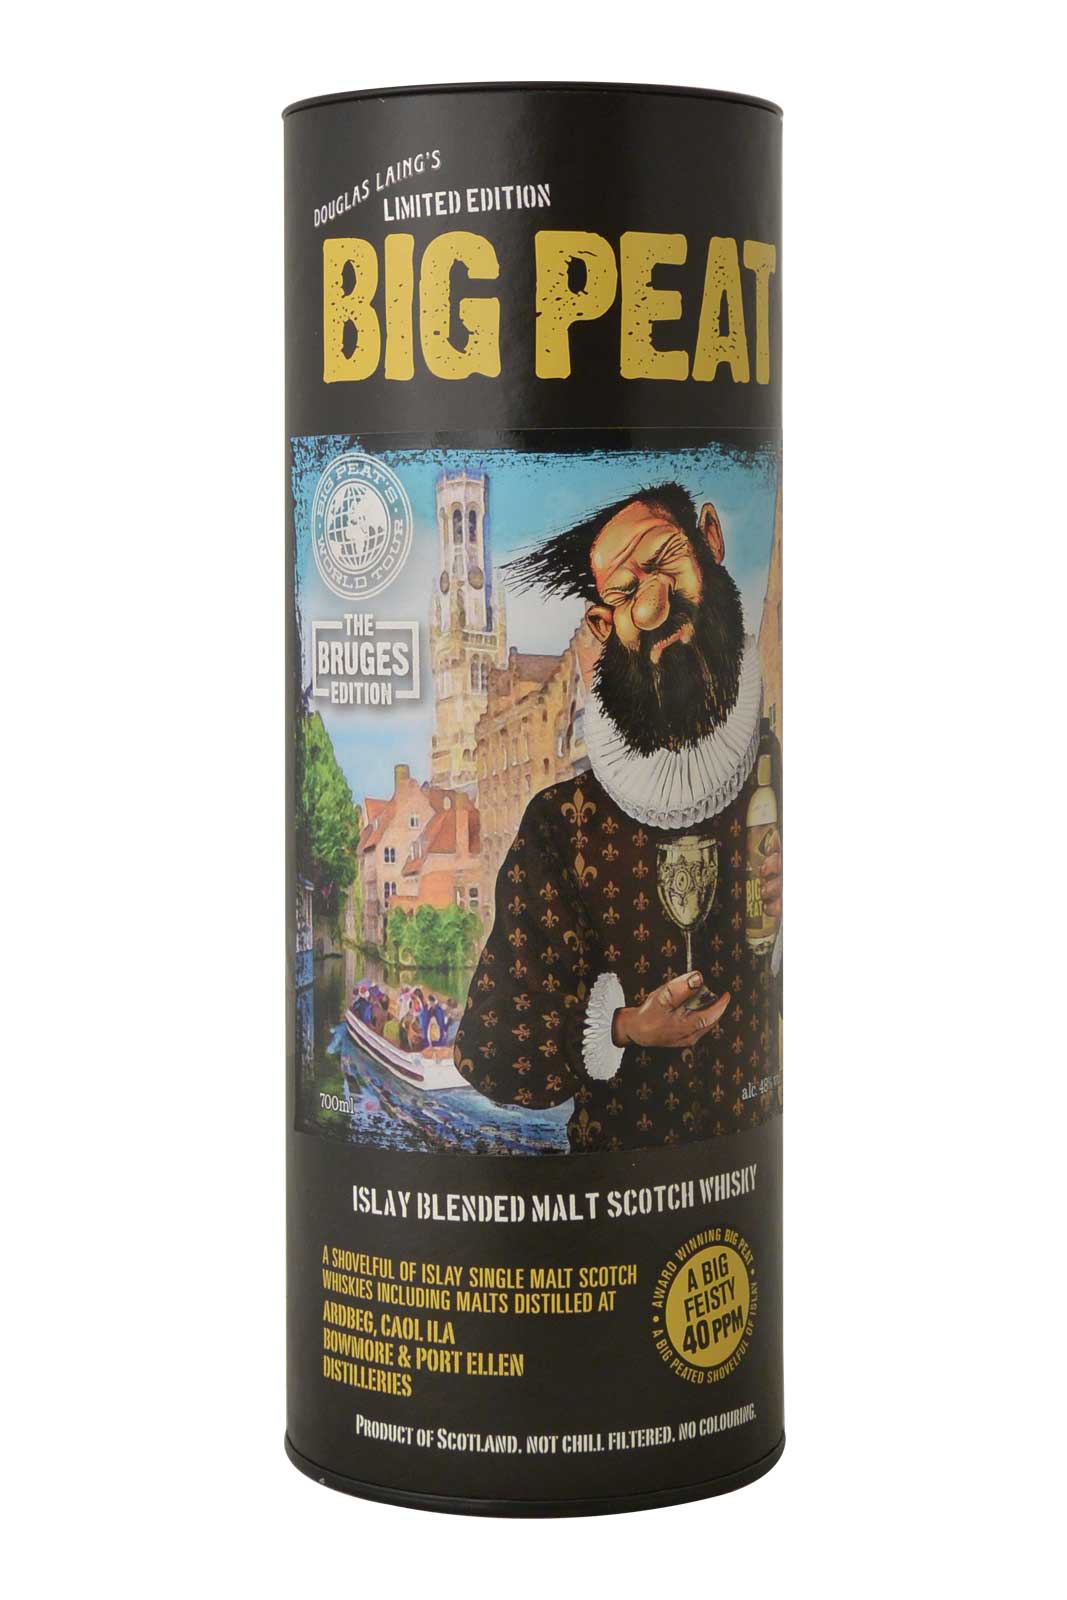 Big Peat World Tour The Bruges Edition - Islay Blended Malt Scotch Whisky